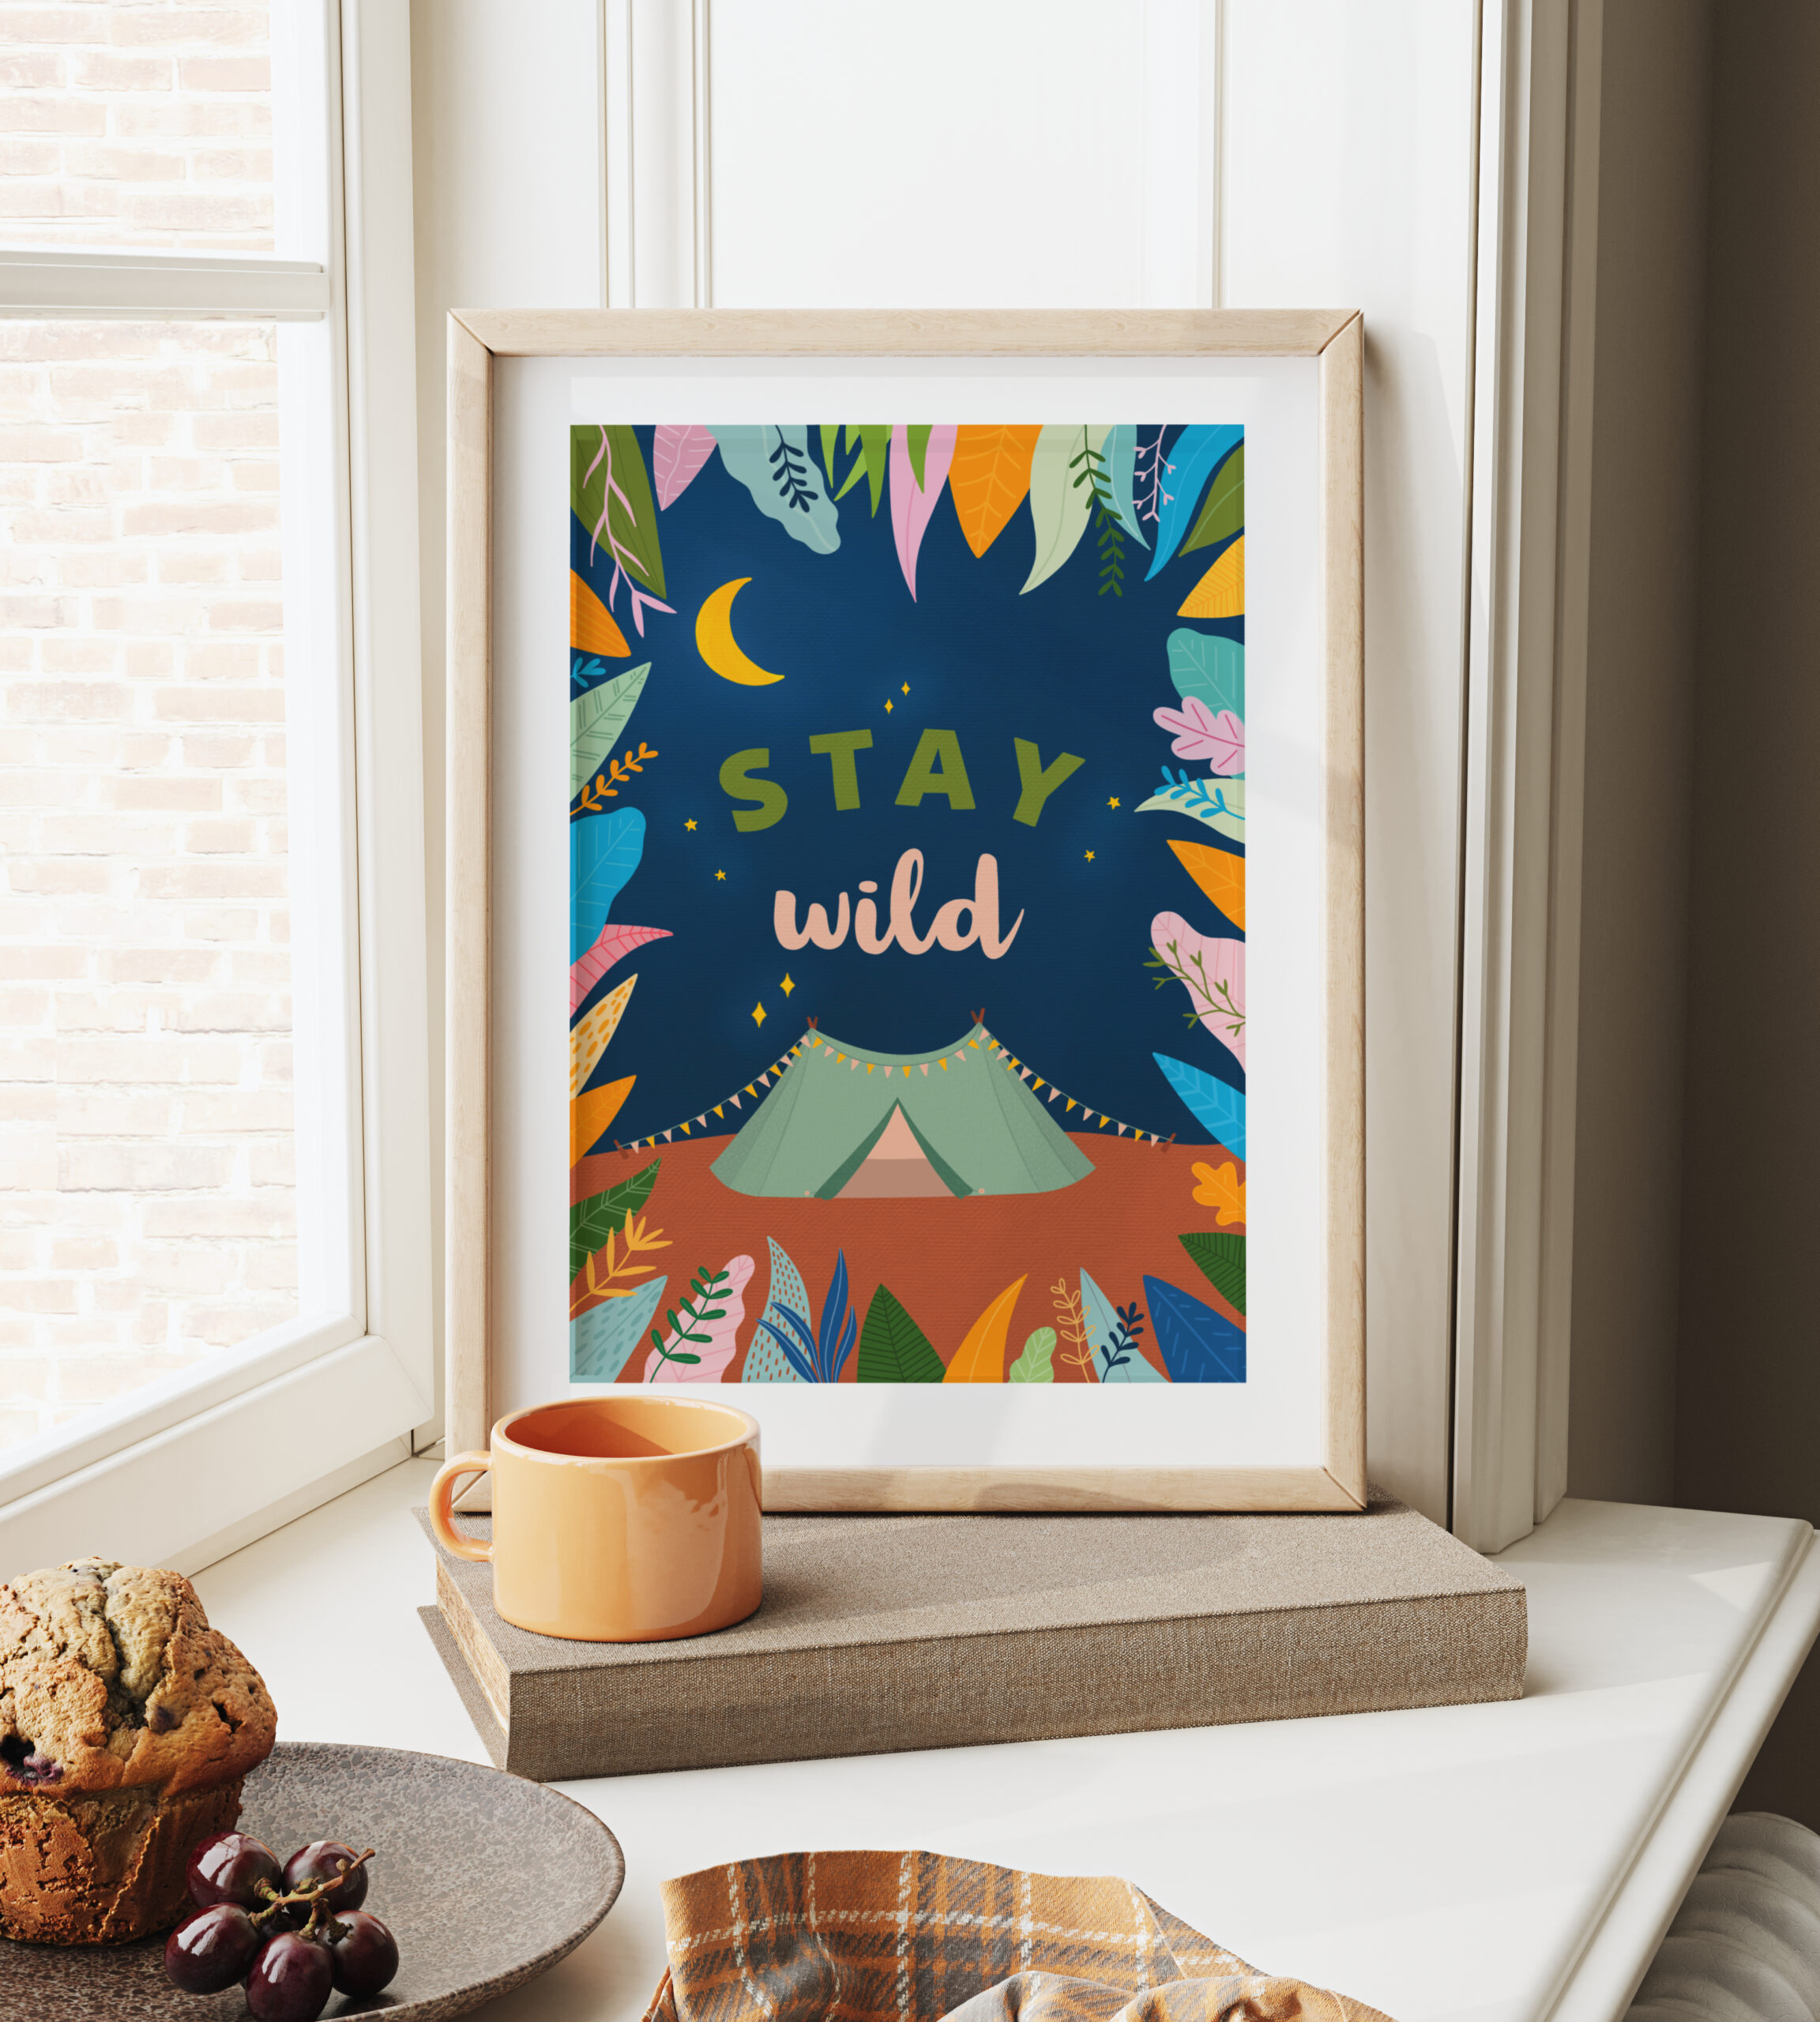 Stay Wild by Fleur & Mimi, illustrated in Co. Tipperary, printed in Ireland